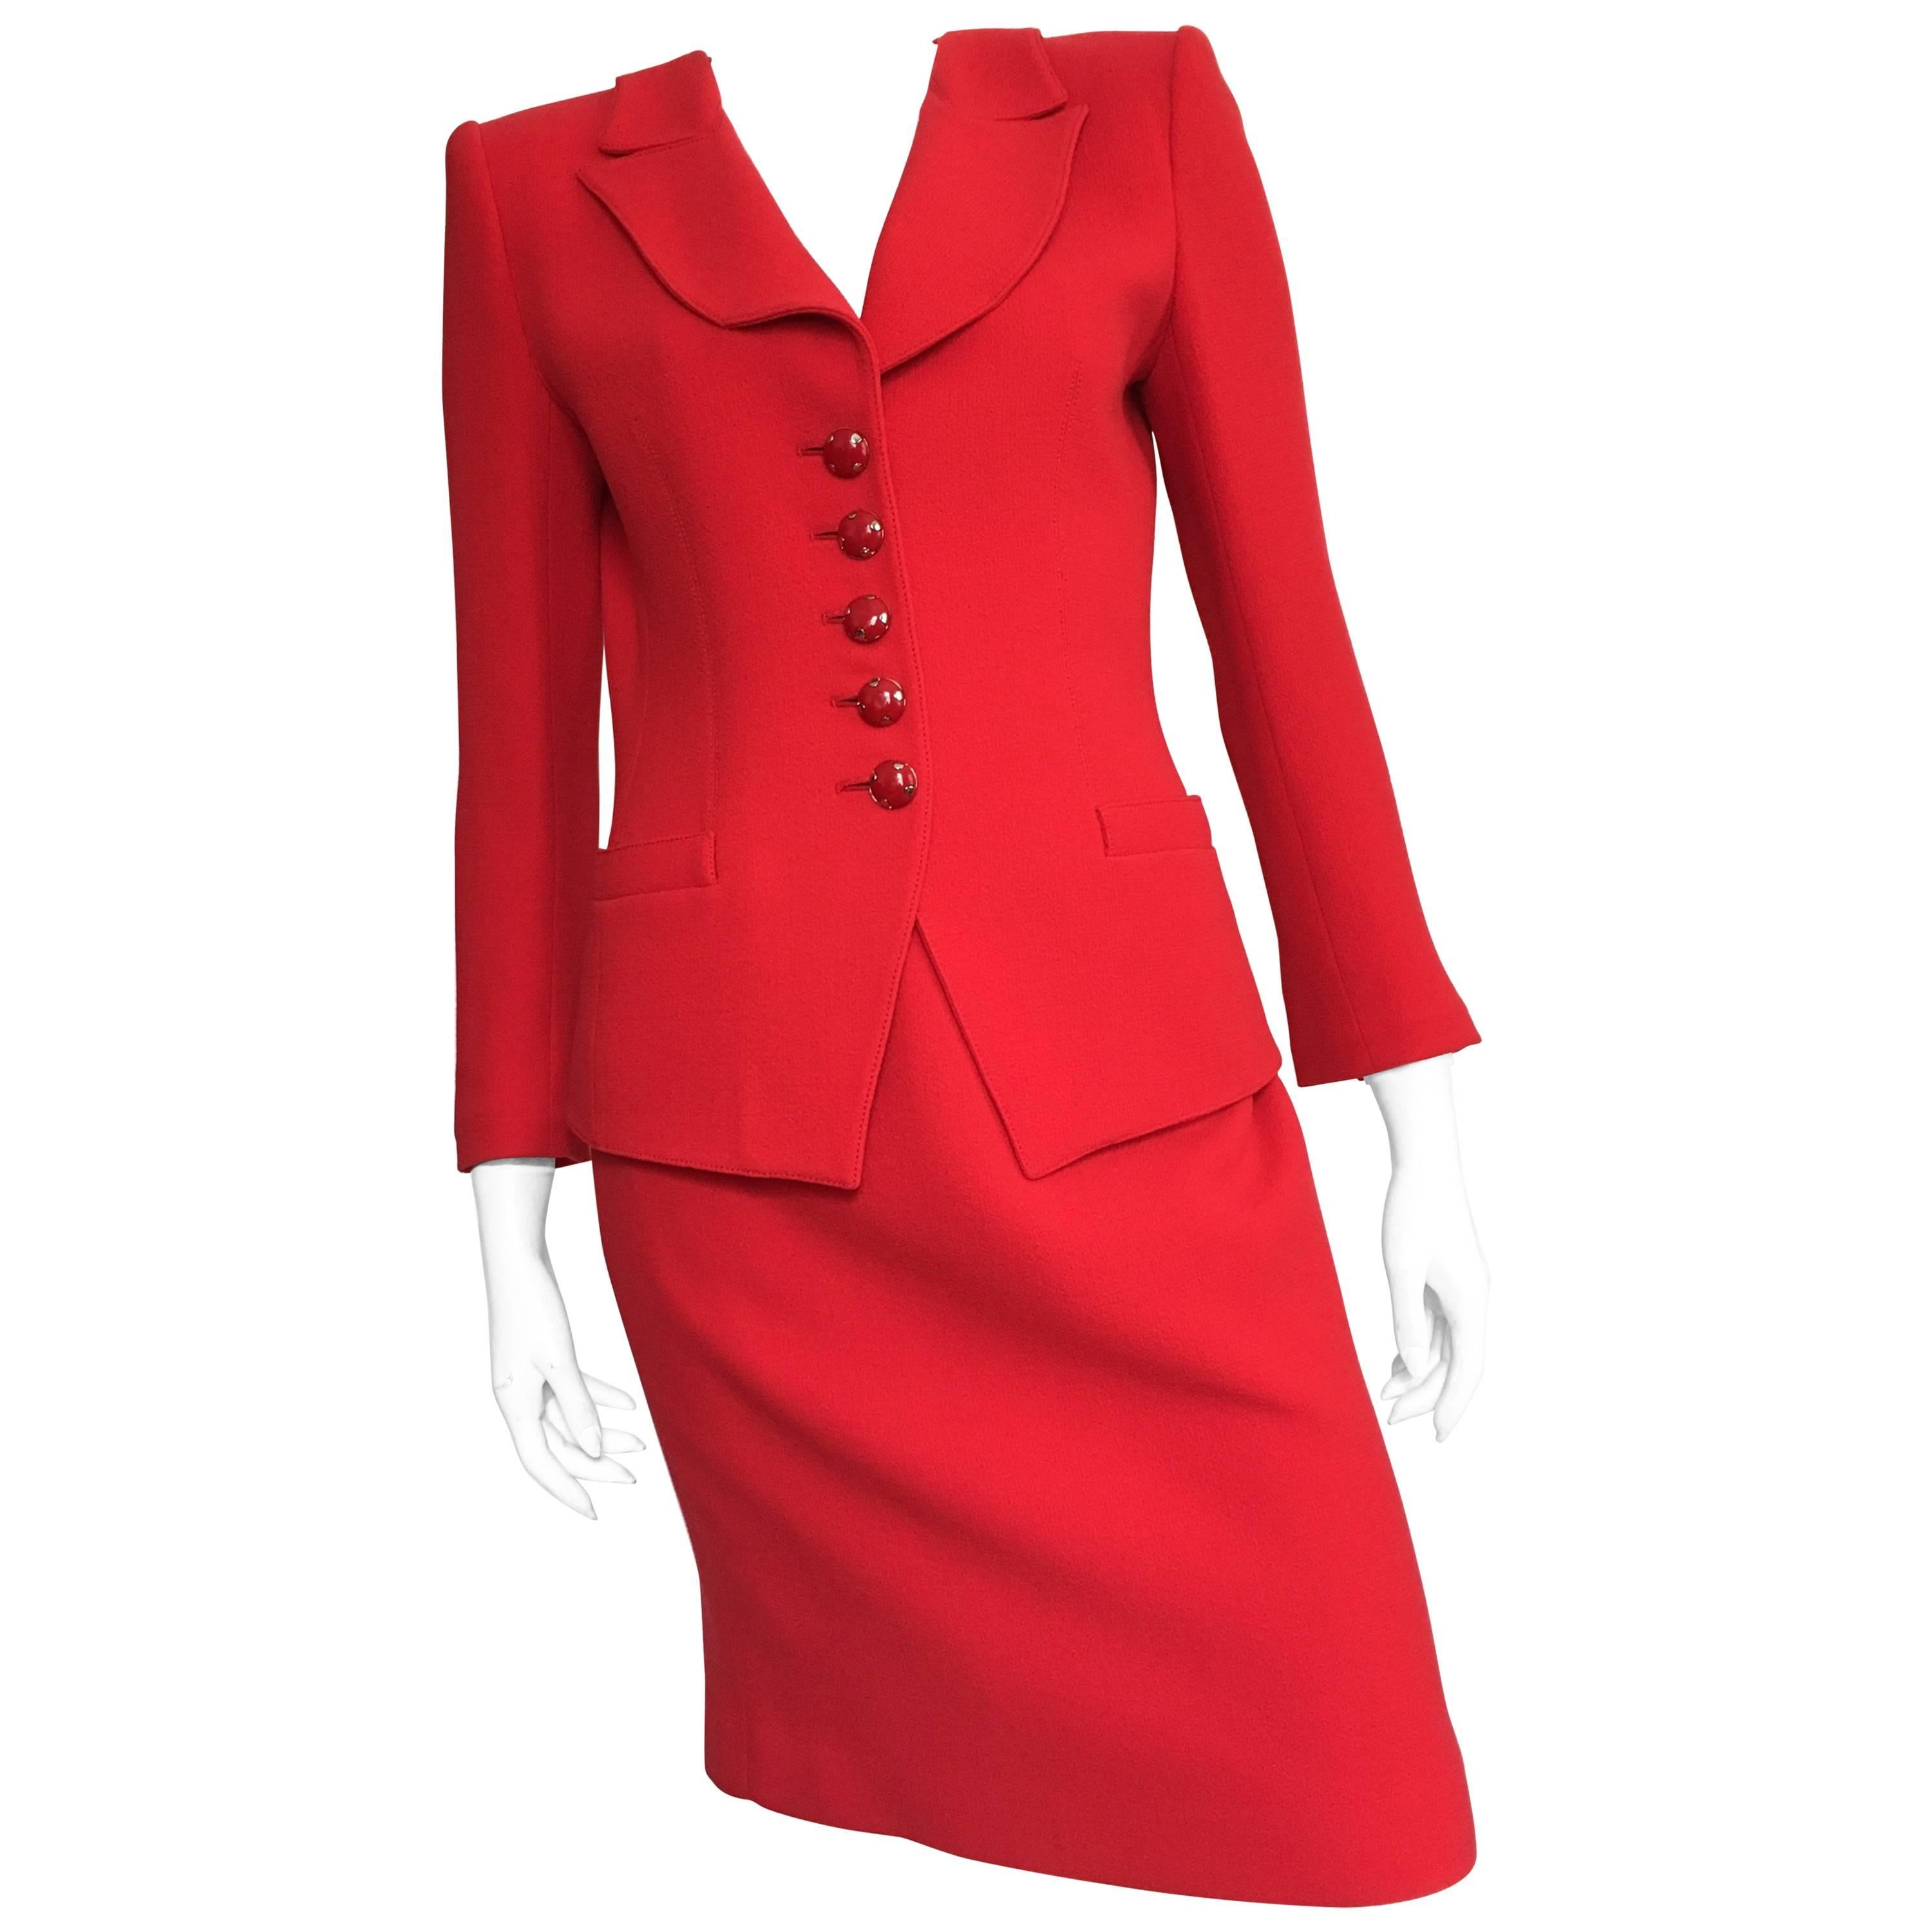 Emanuel Ungaro Red Power Wool Crepe Suit Size 6, 1990s For Sale